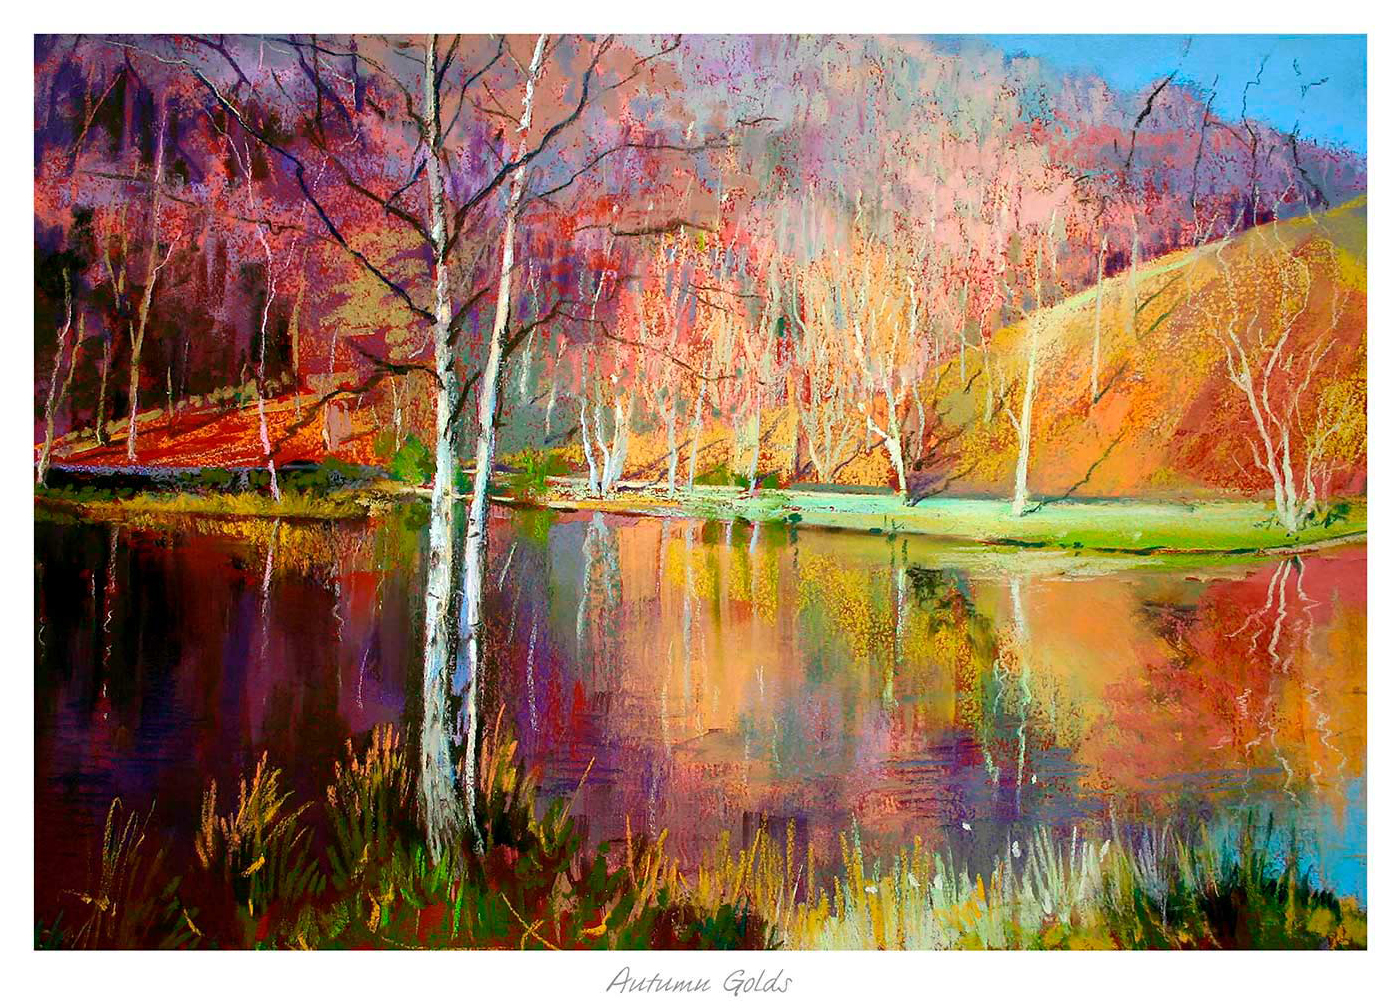 The image depicts a vibrant, colorful impressionist-style painting of a serene landscape with trees, a body of water, and reflections. By Kate Philp